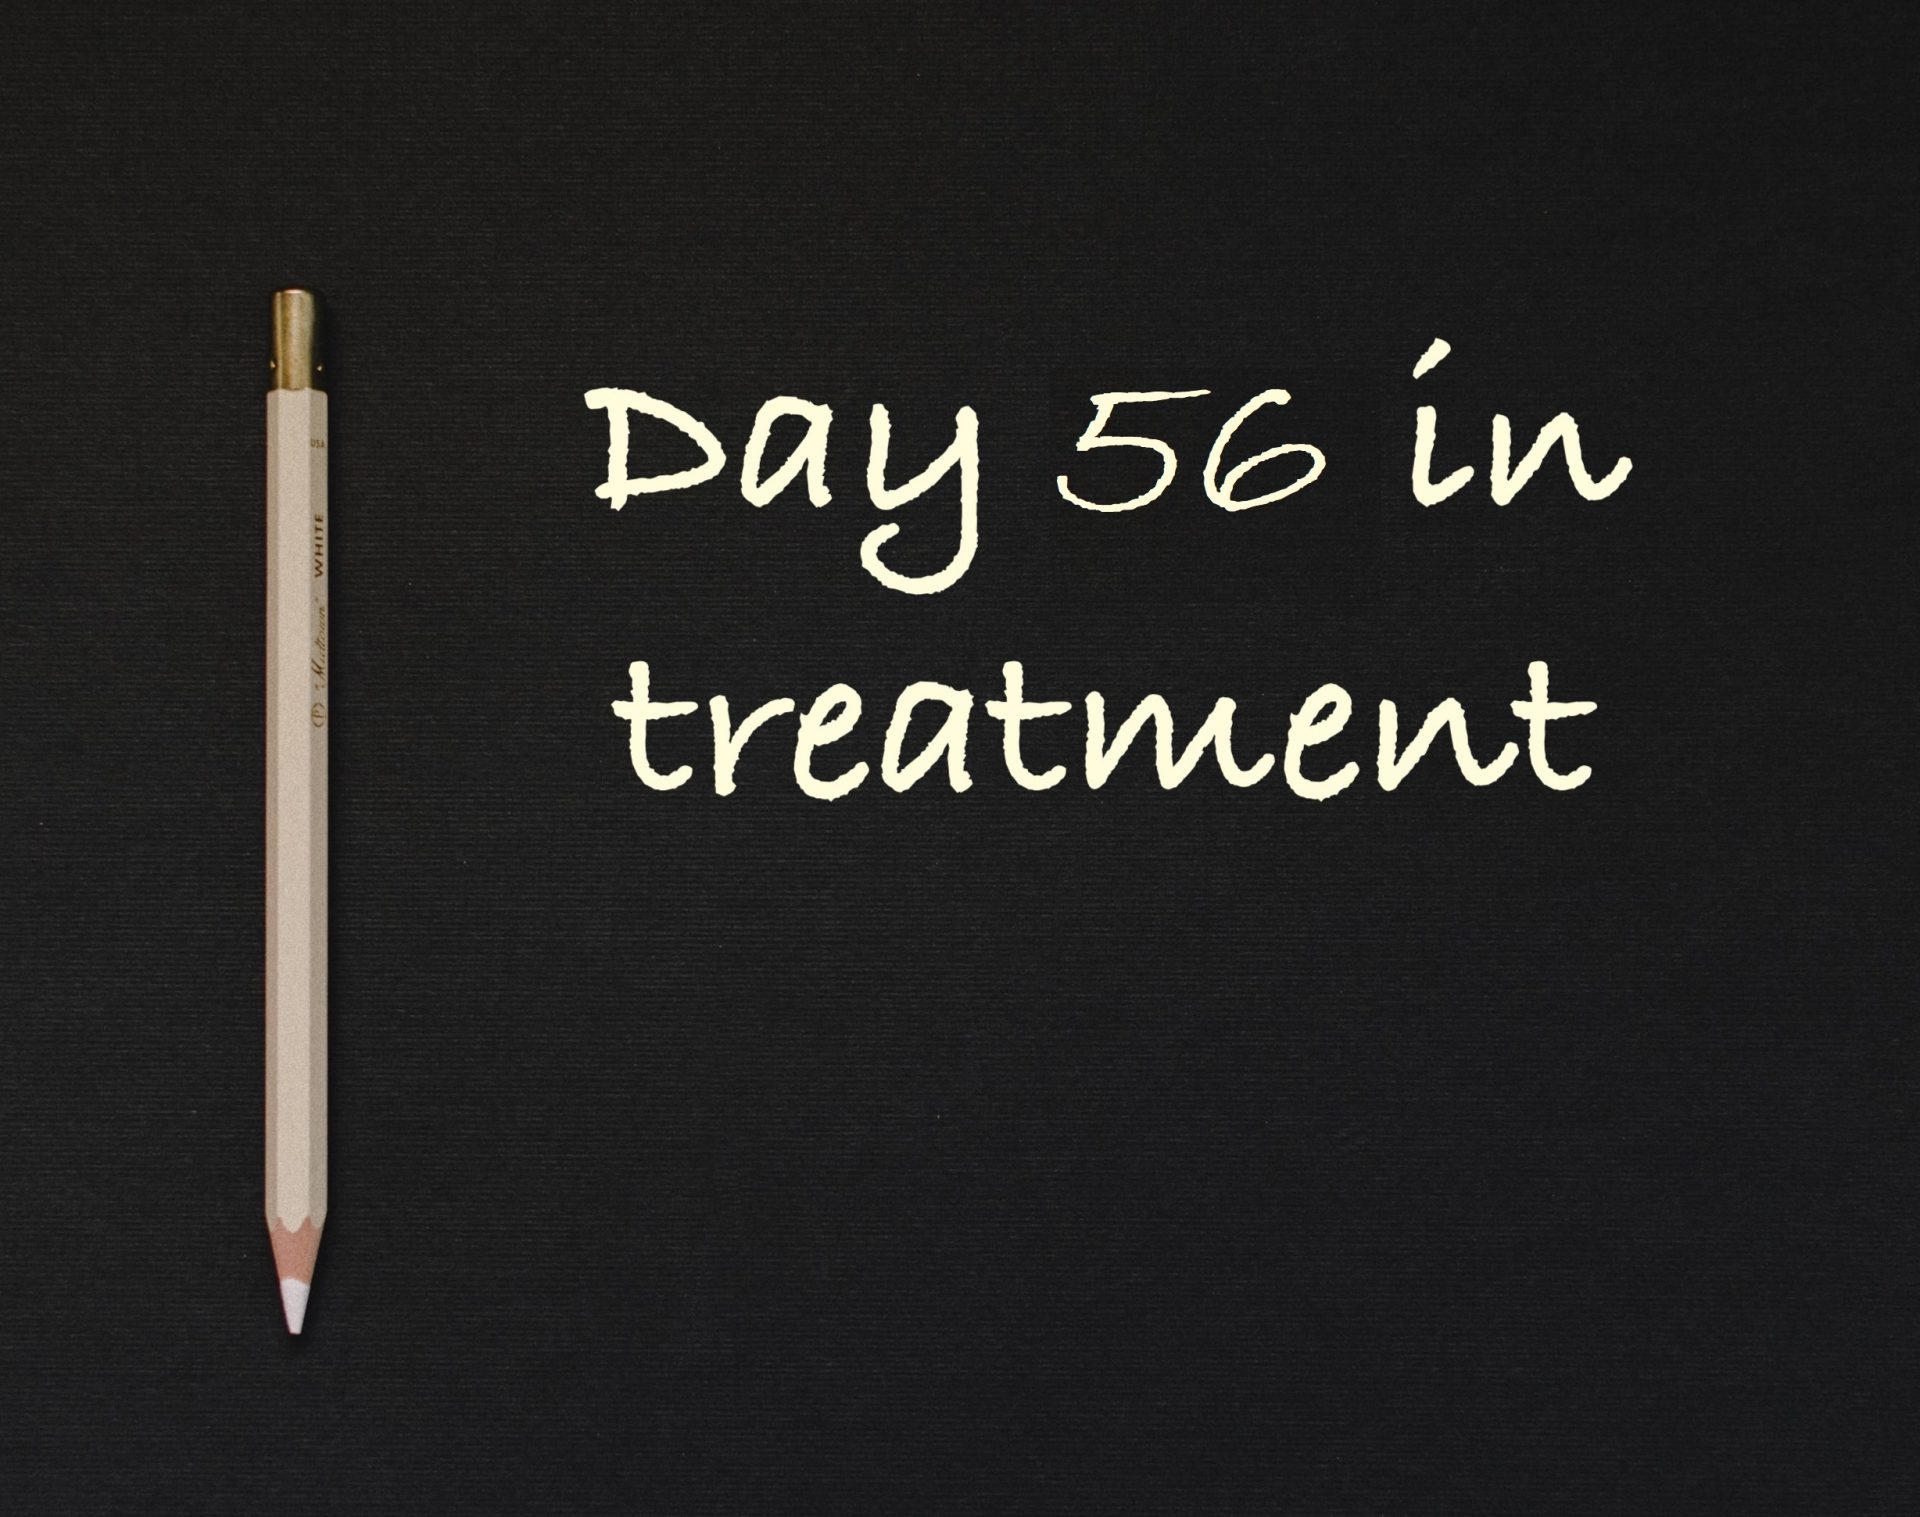 Day 56 in treatment